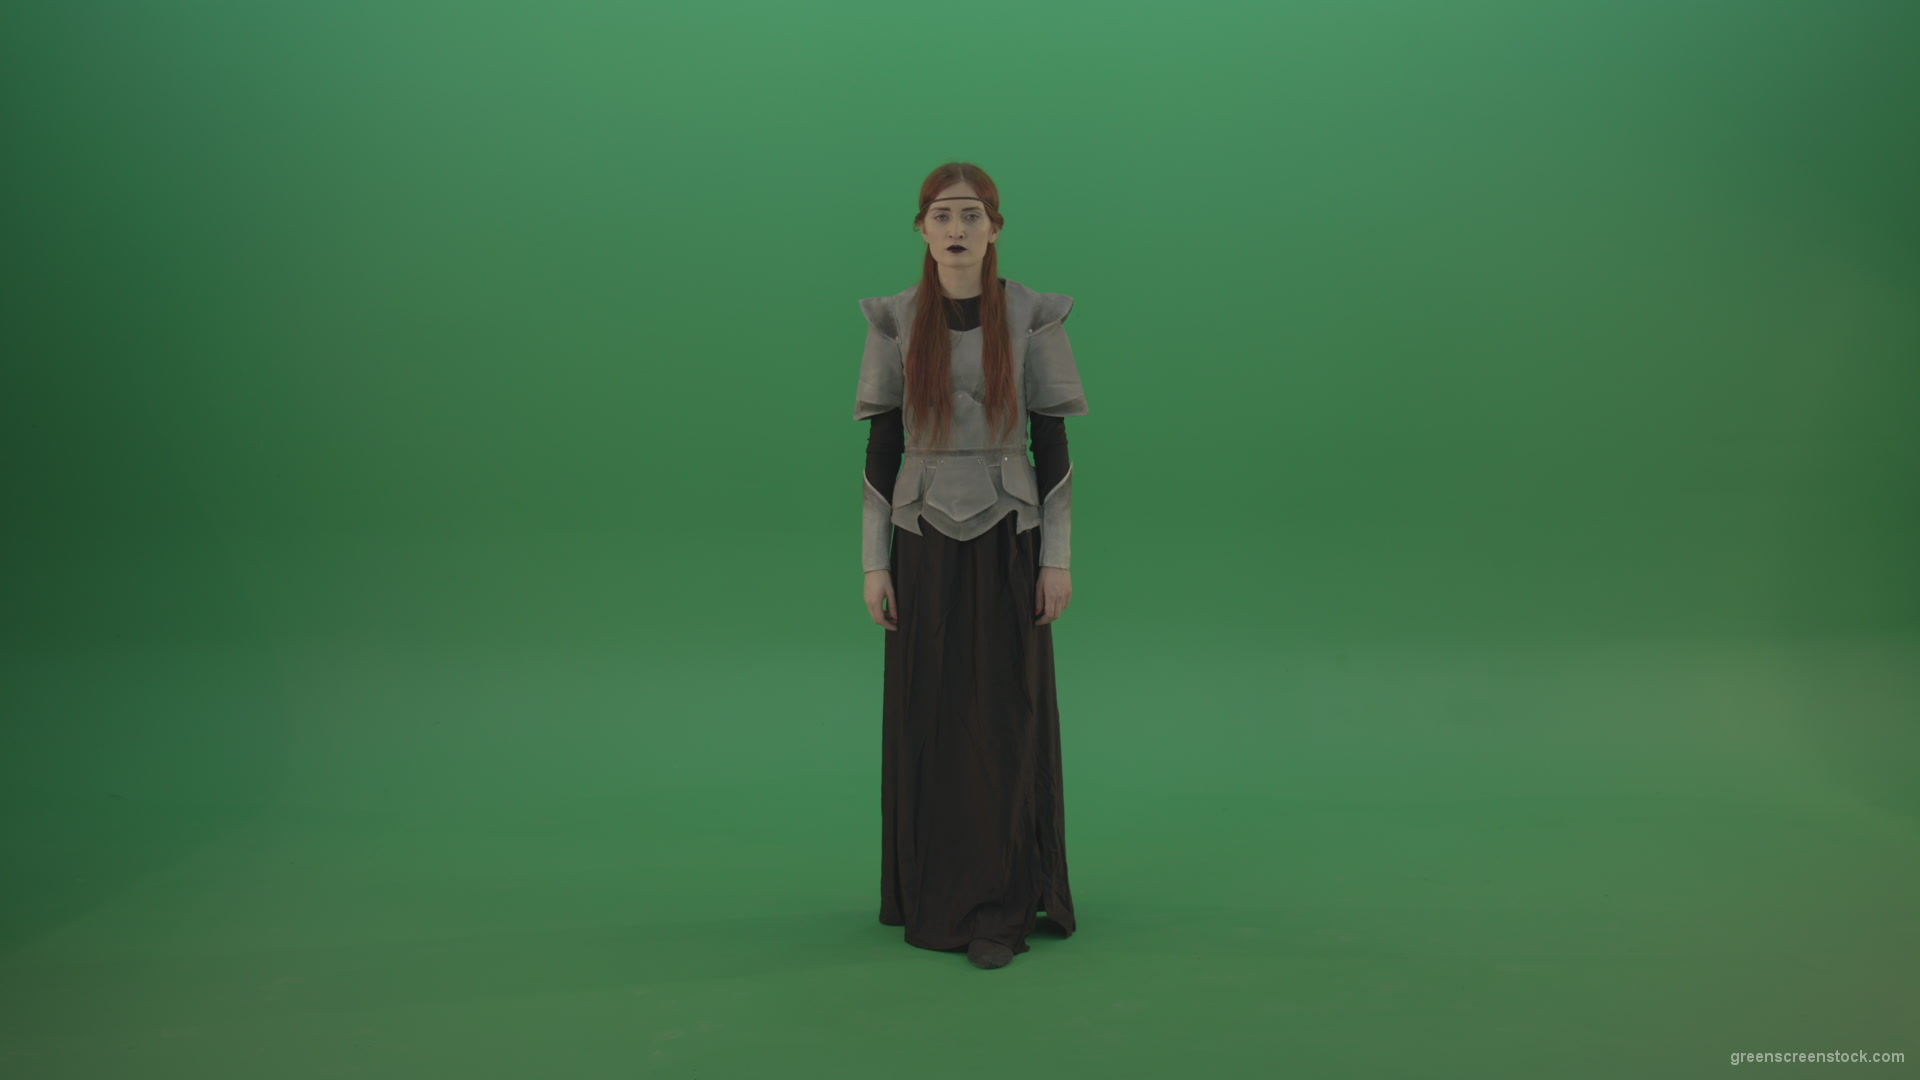 Redheaded-girl-in-full-height-in-medieval-warrior-clothing-asks-for-help-from-the-gods-on-green-screen_001 Green Screen Stock